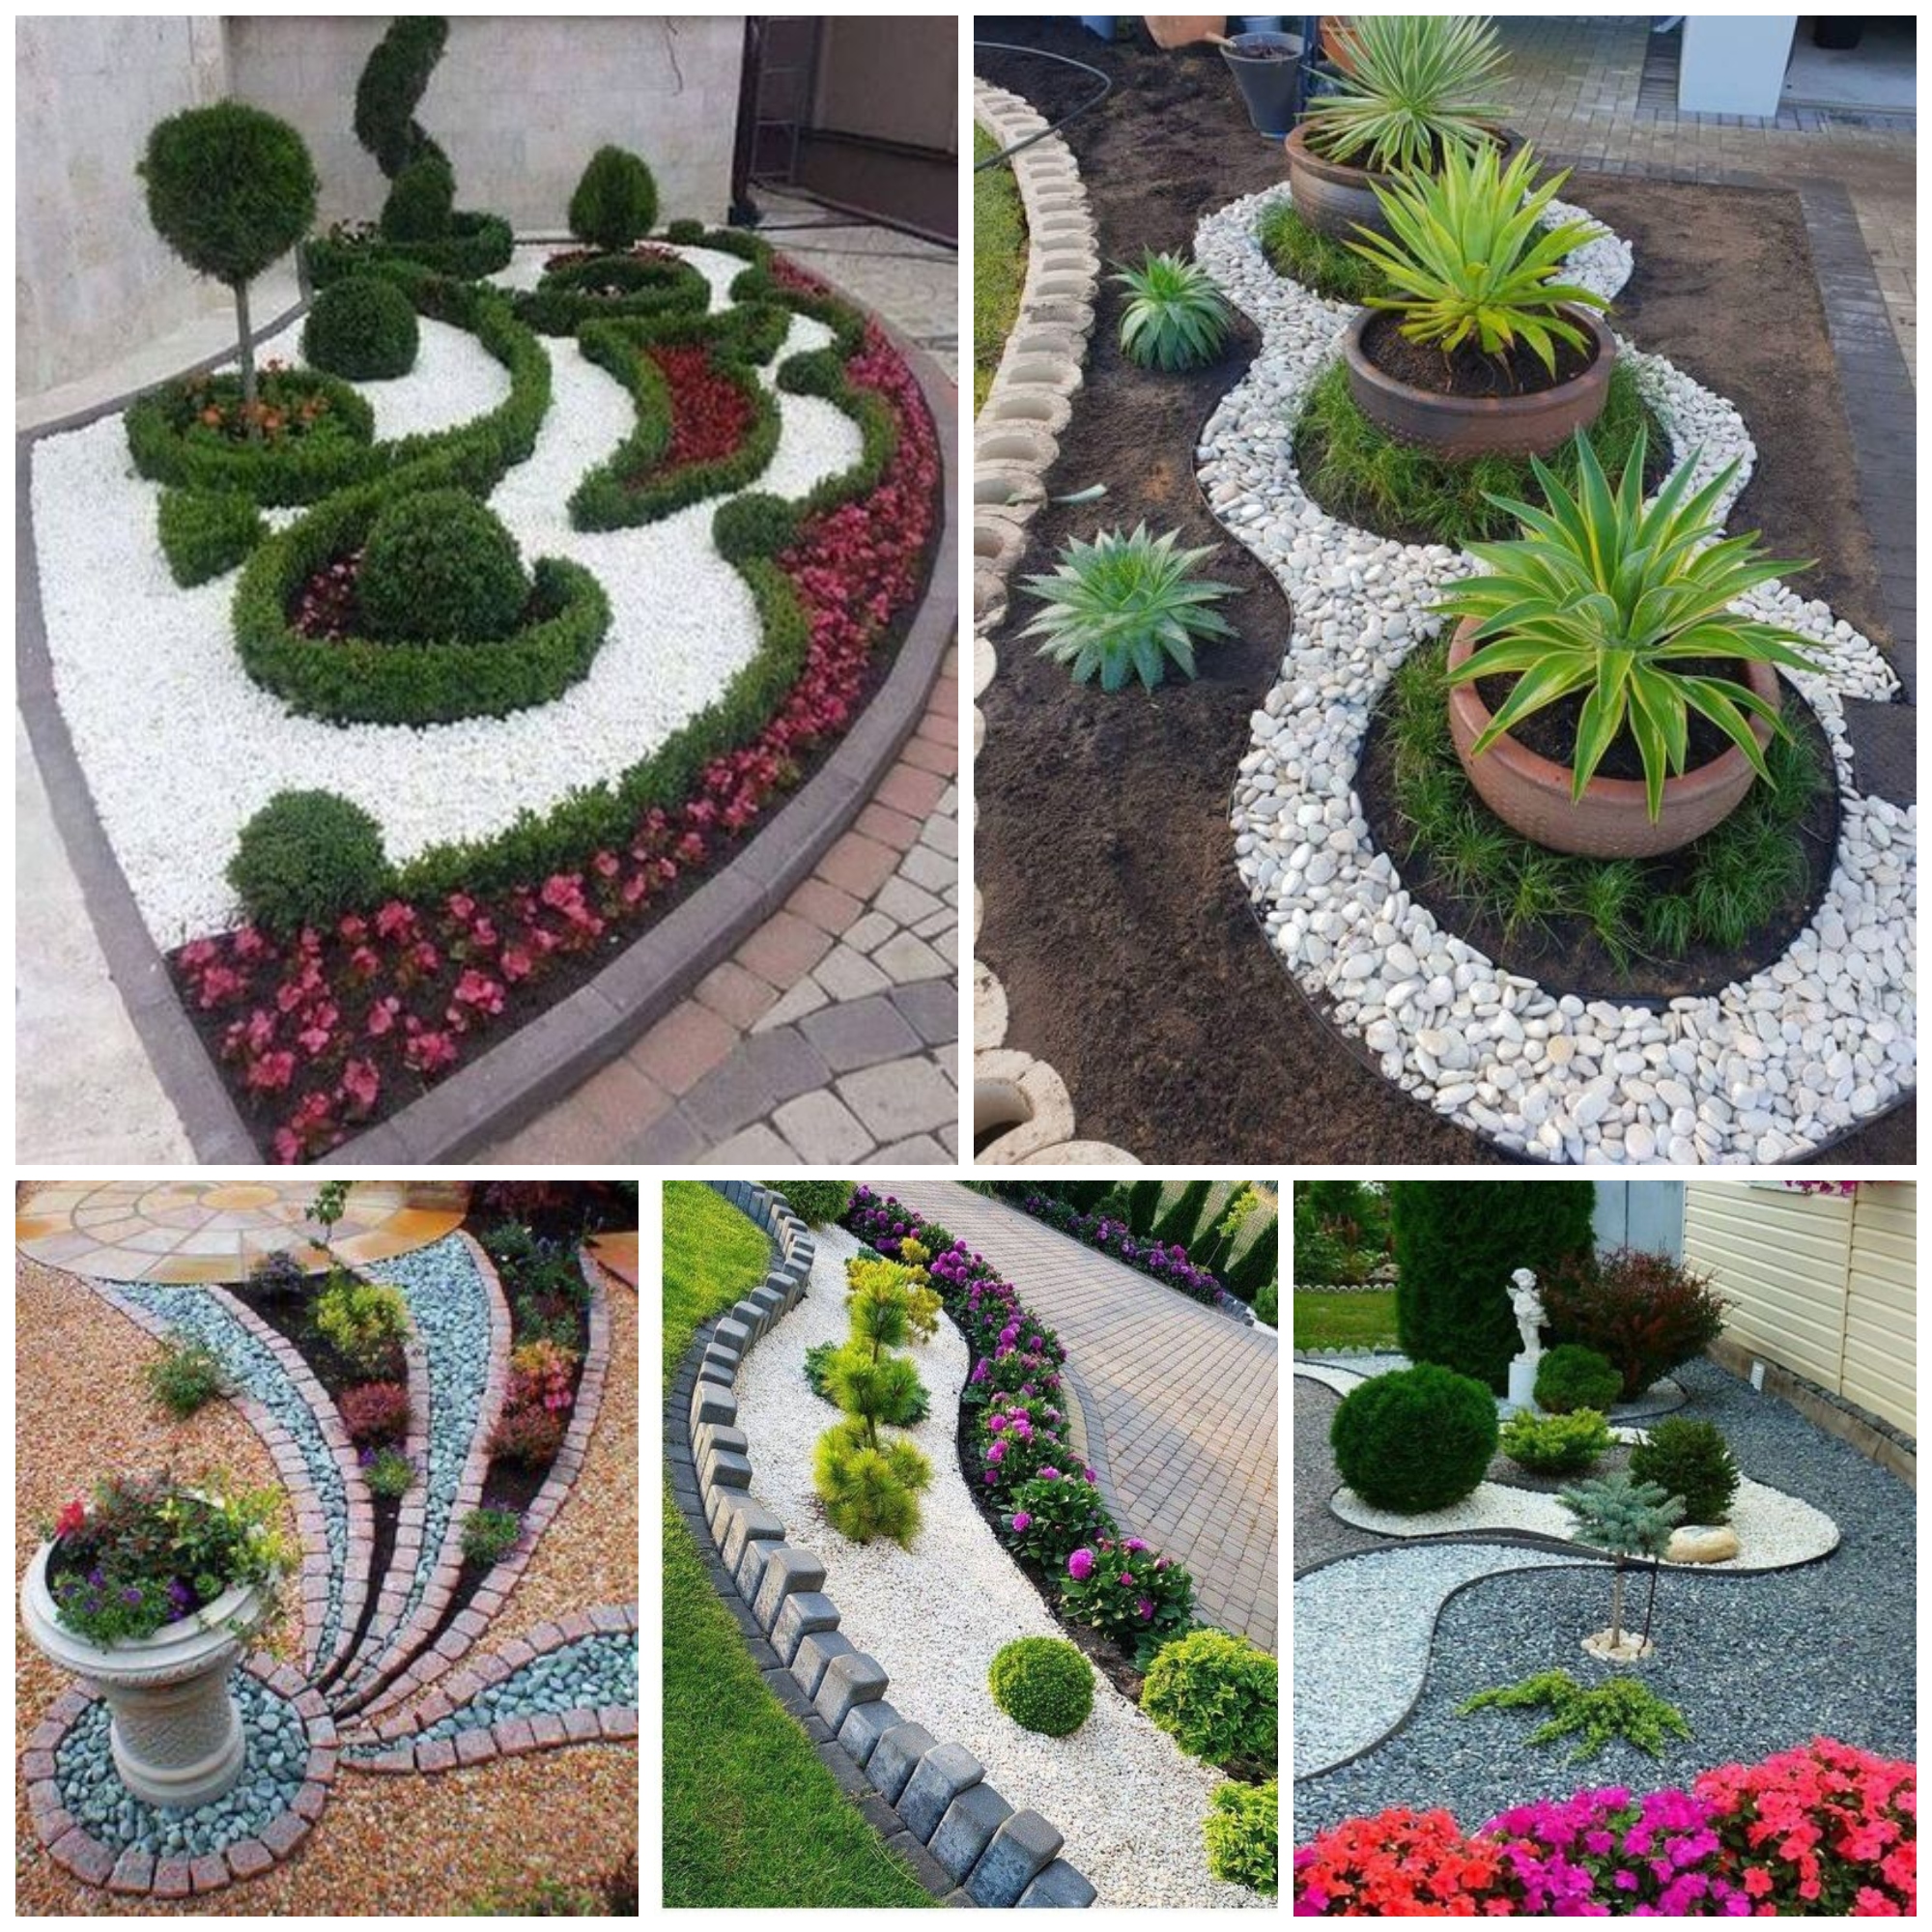 We decorate our flower beds with decorative gravel: 32 original ideas that will boost our garden to another level